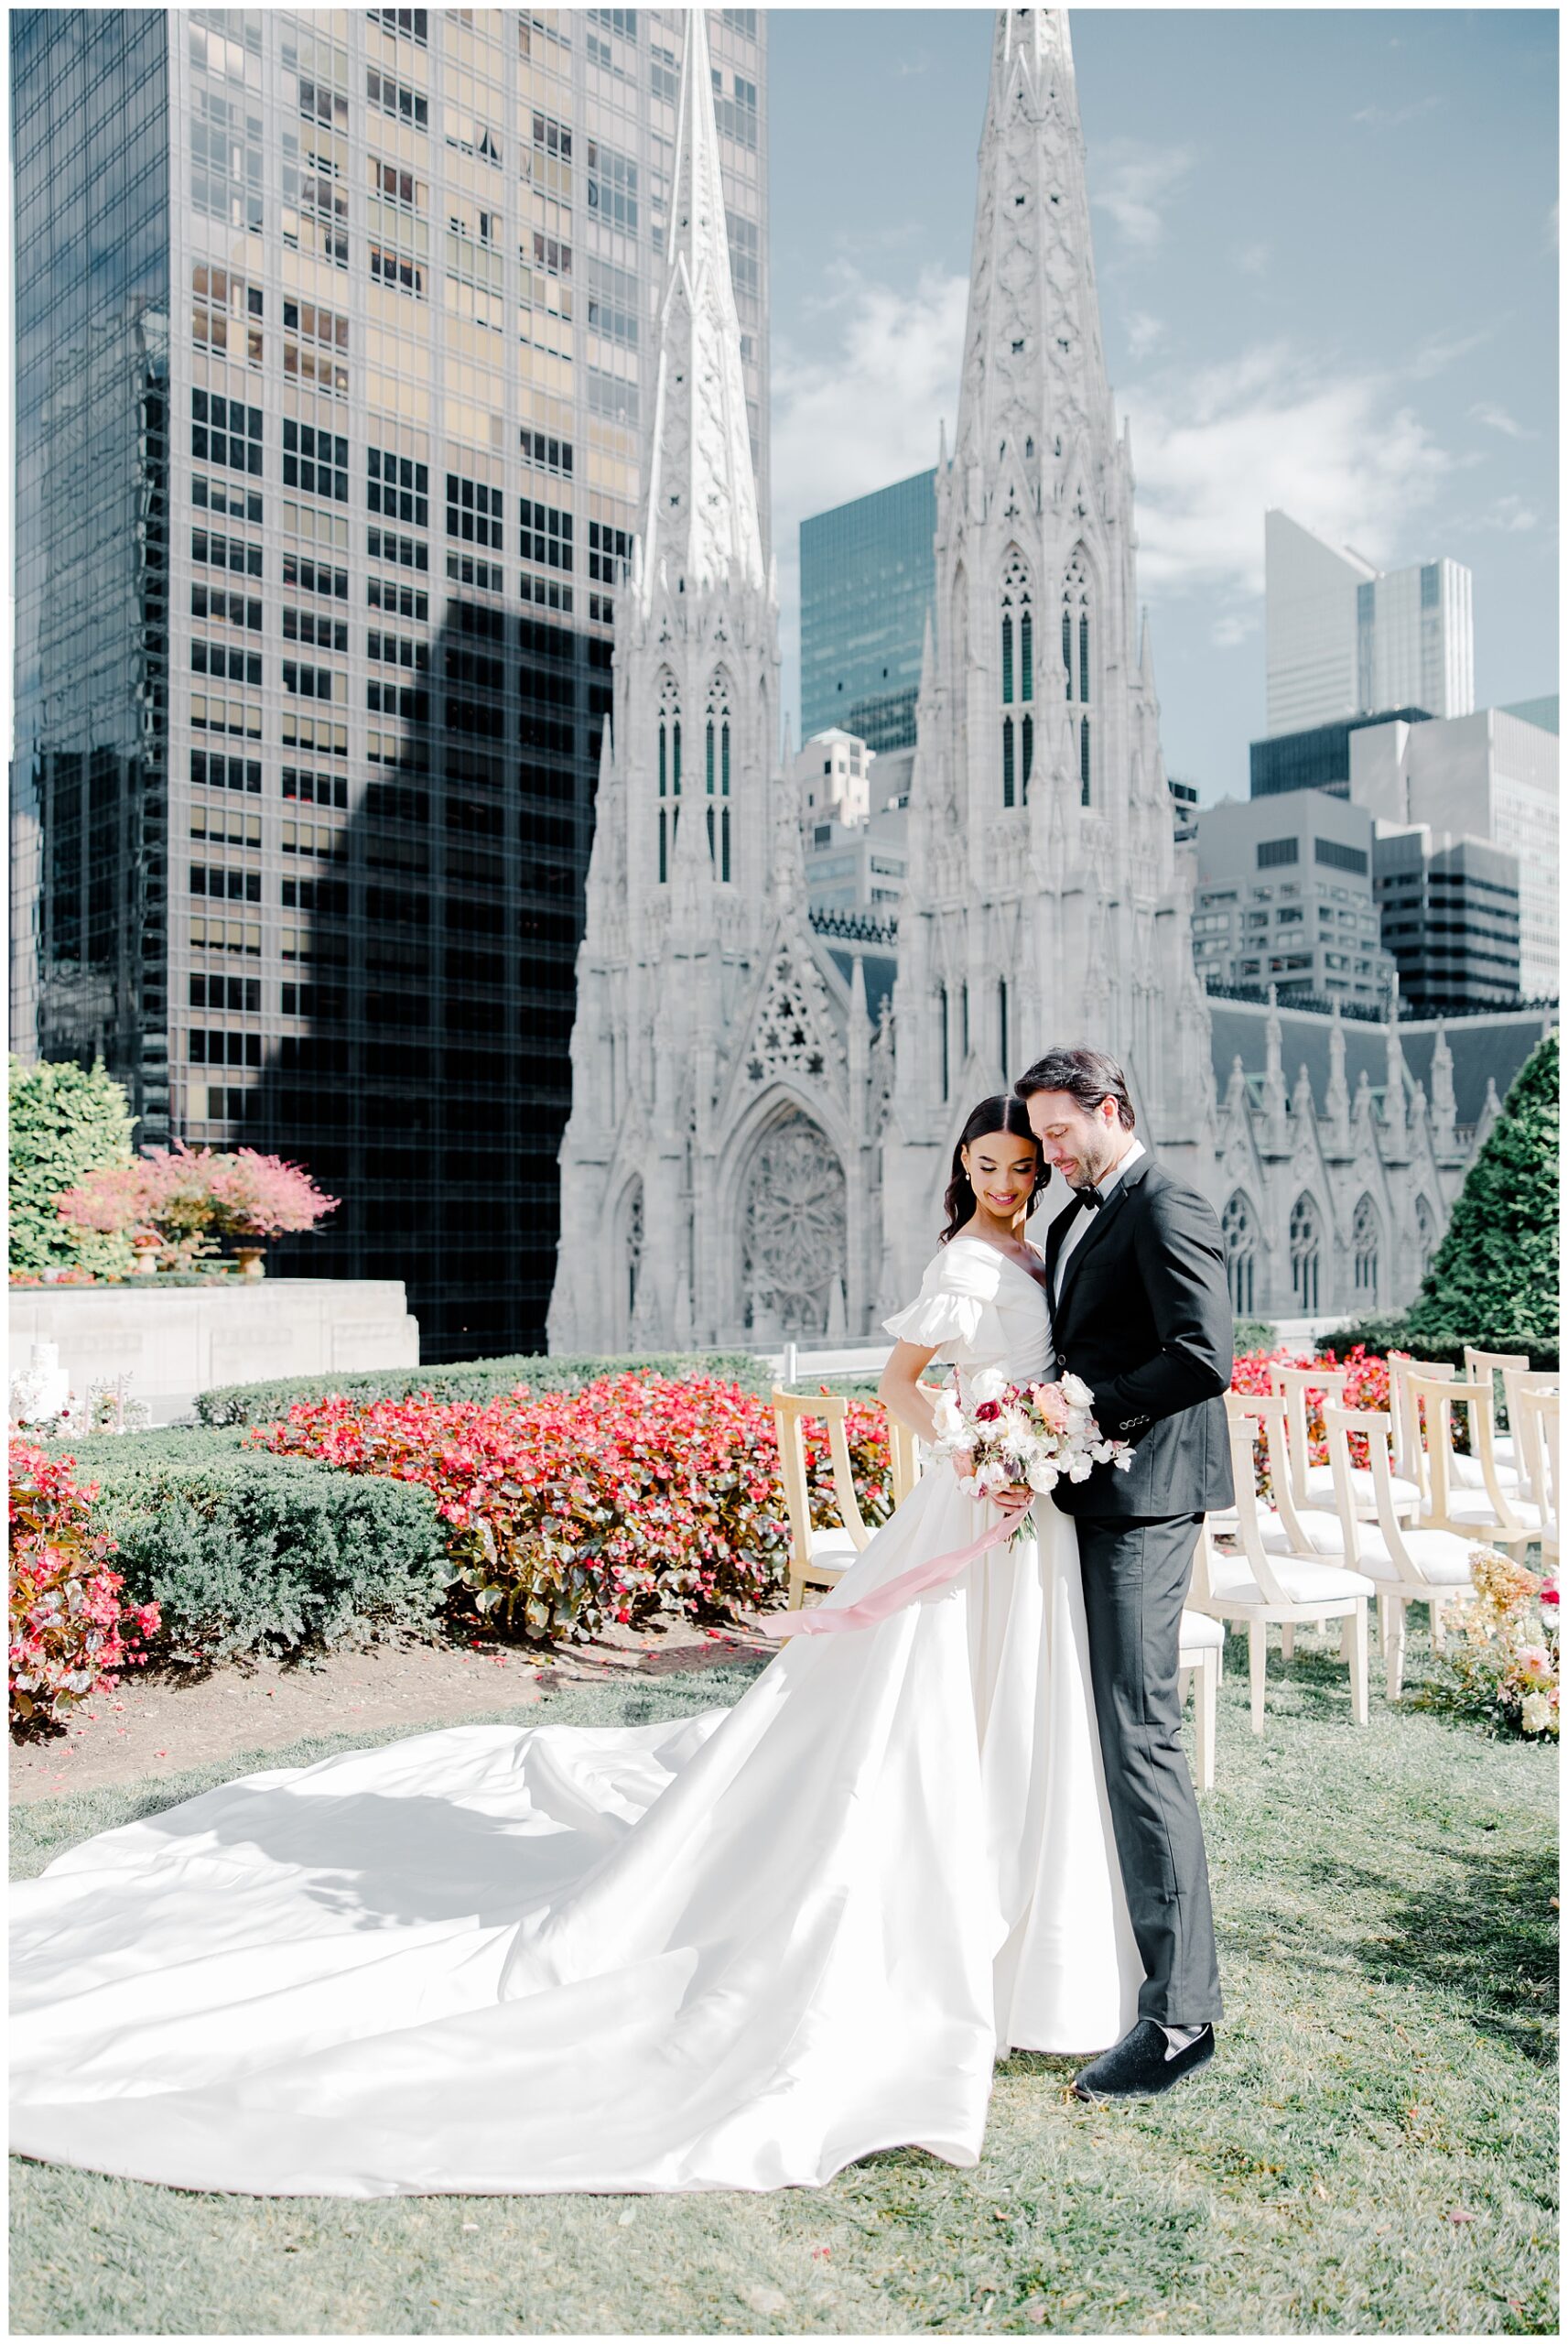 wedding portraits on rooftop at 620 Loft and Garden Wedding in New York City